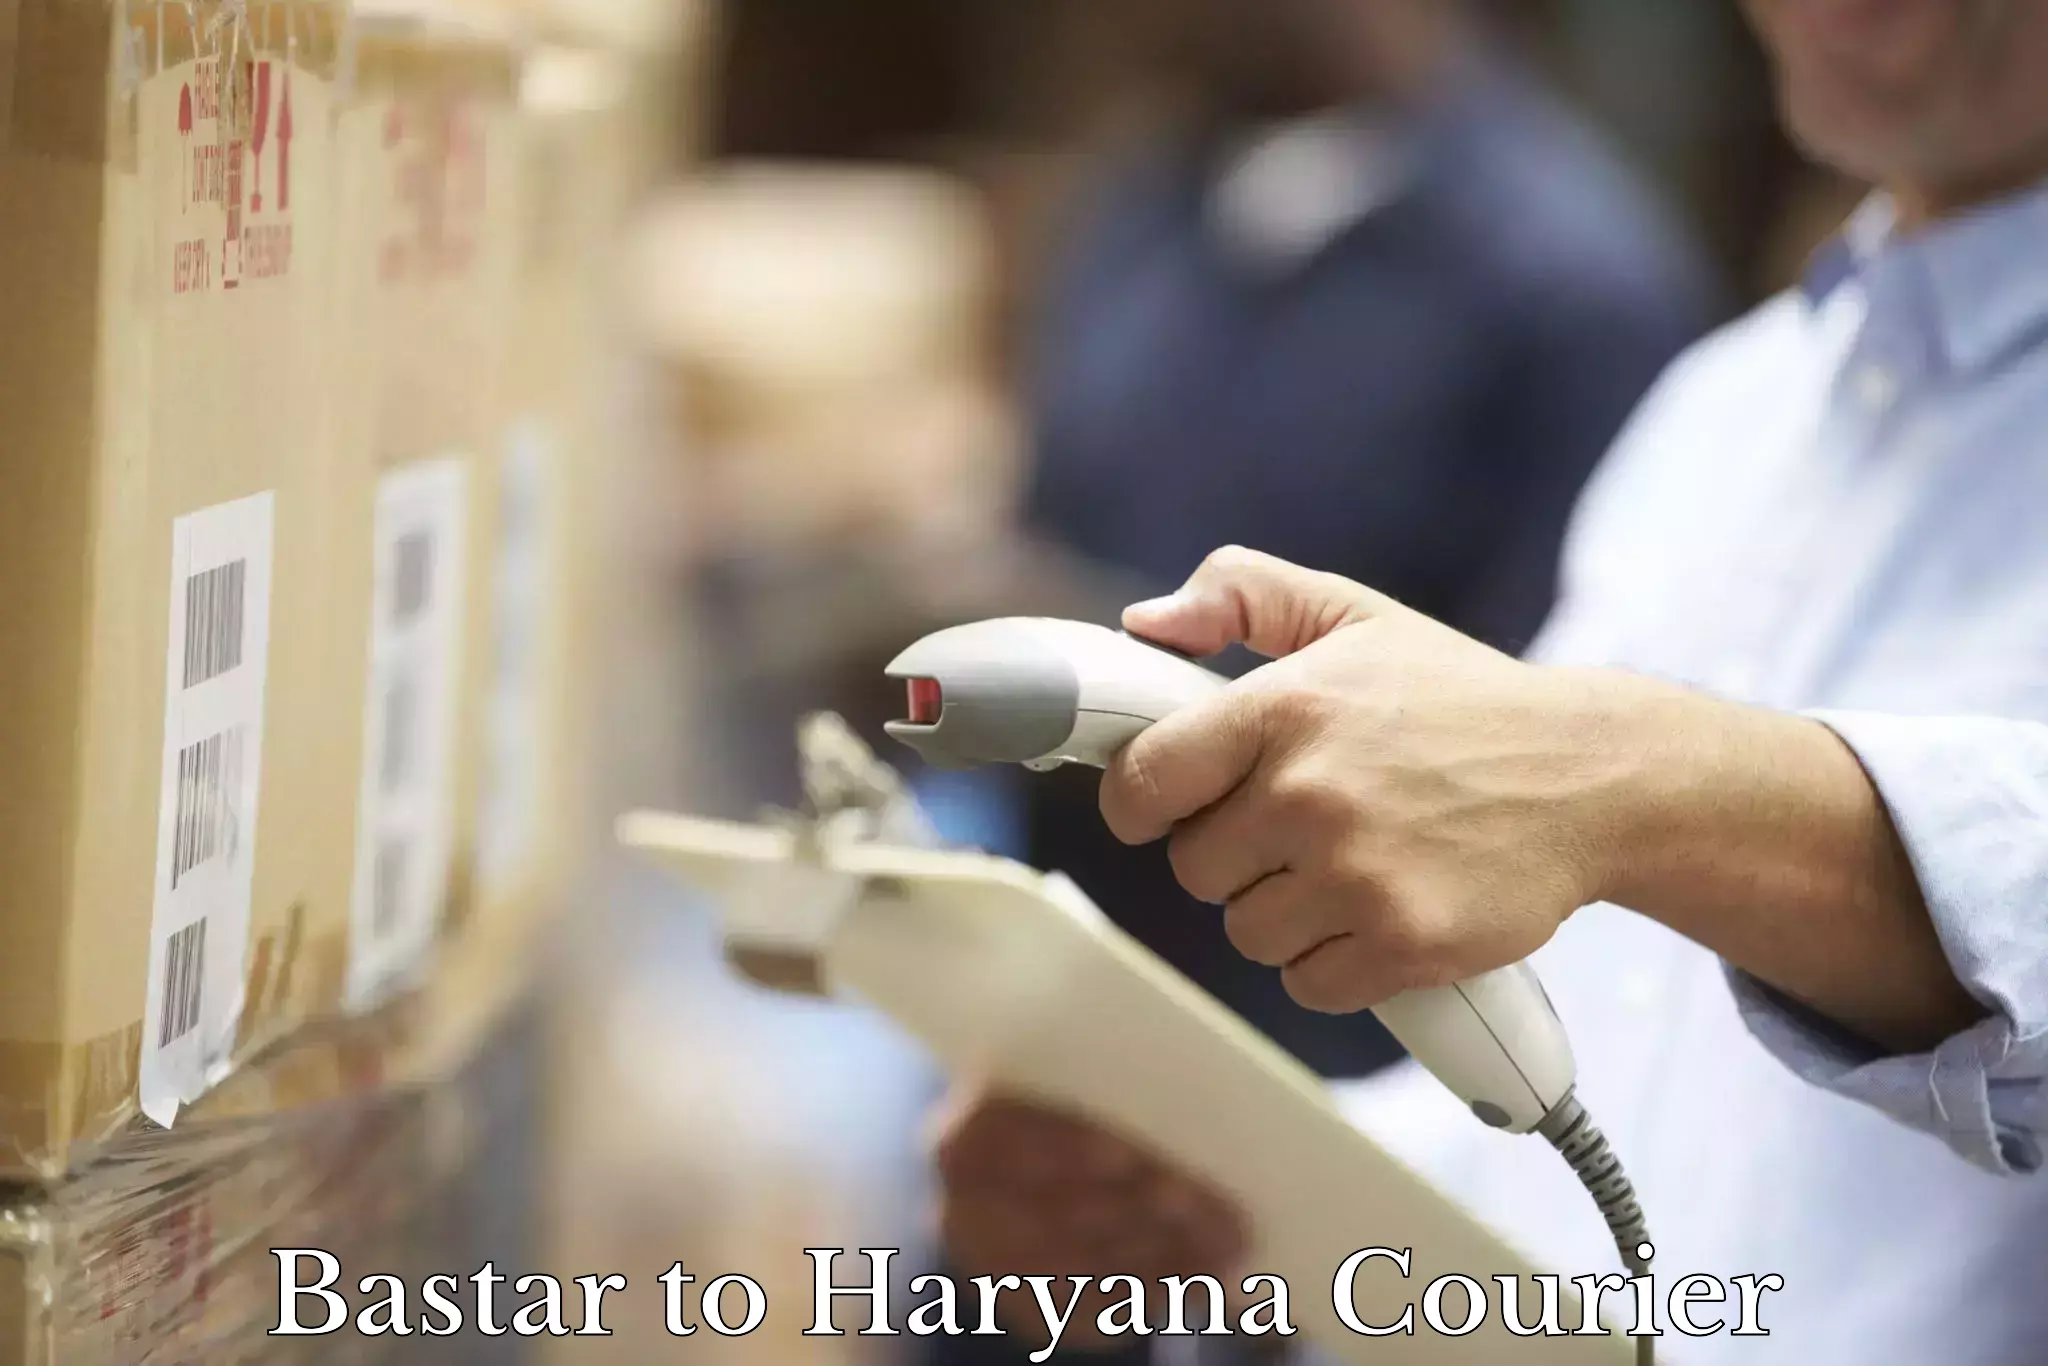 State-of-the-art courier technology Bastar to Rewari